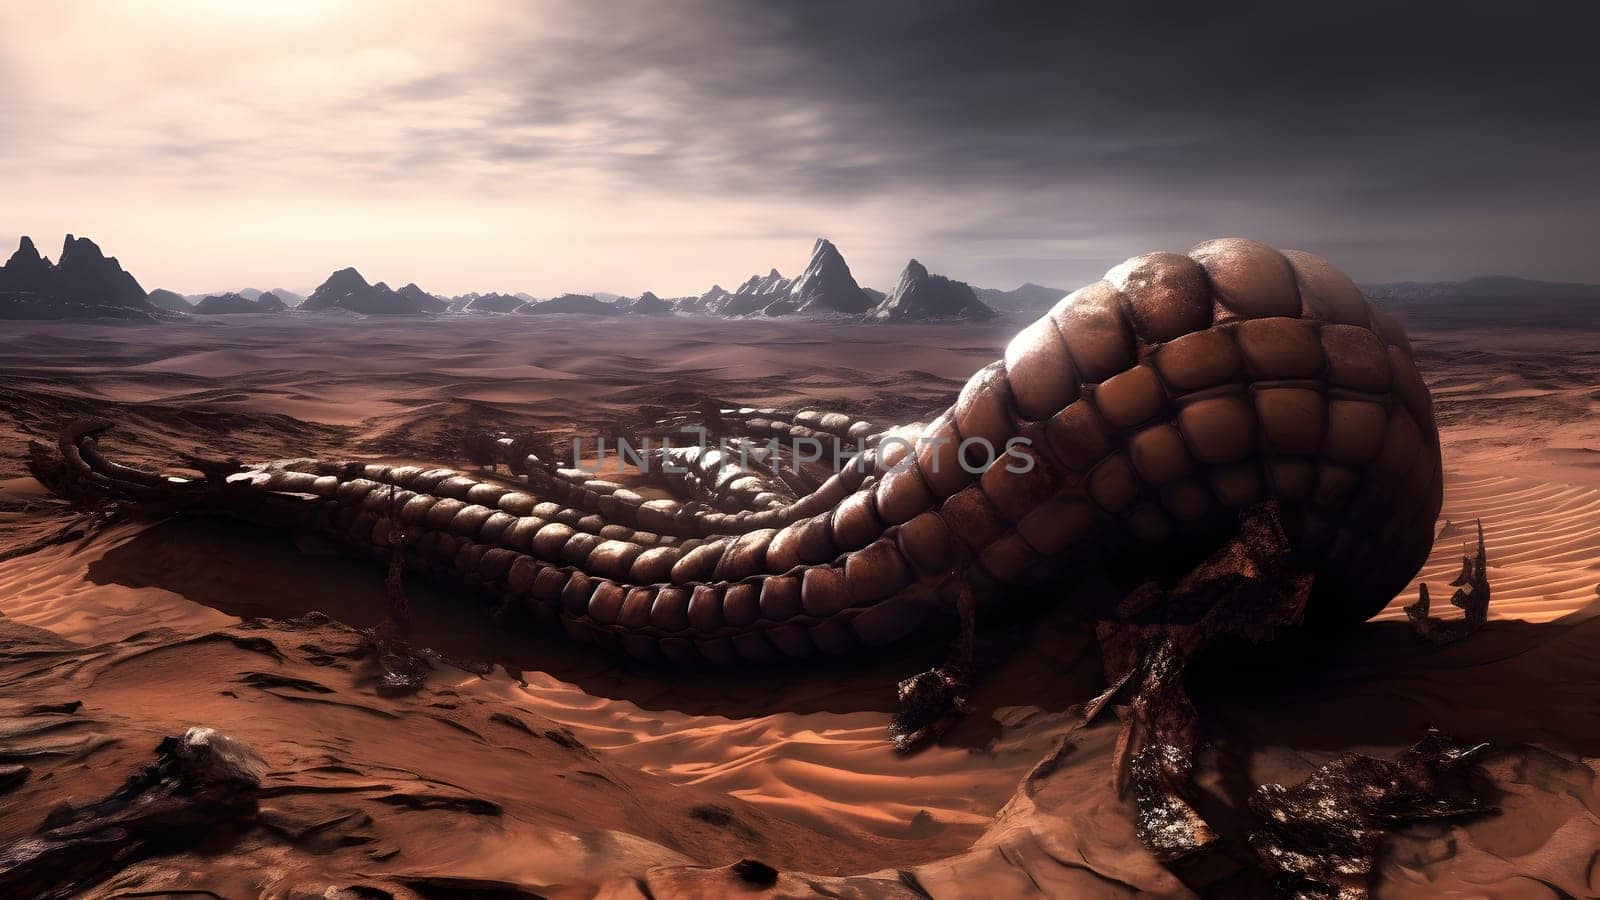 giant worm creature on martian desert surface. Neural network generated in May 2023. Not based on any actual person, scene or pattern.